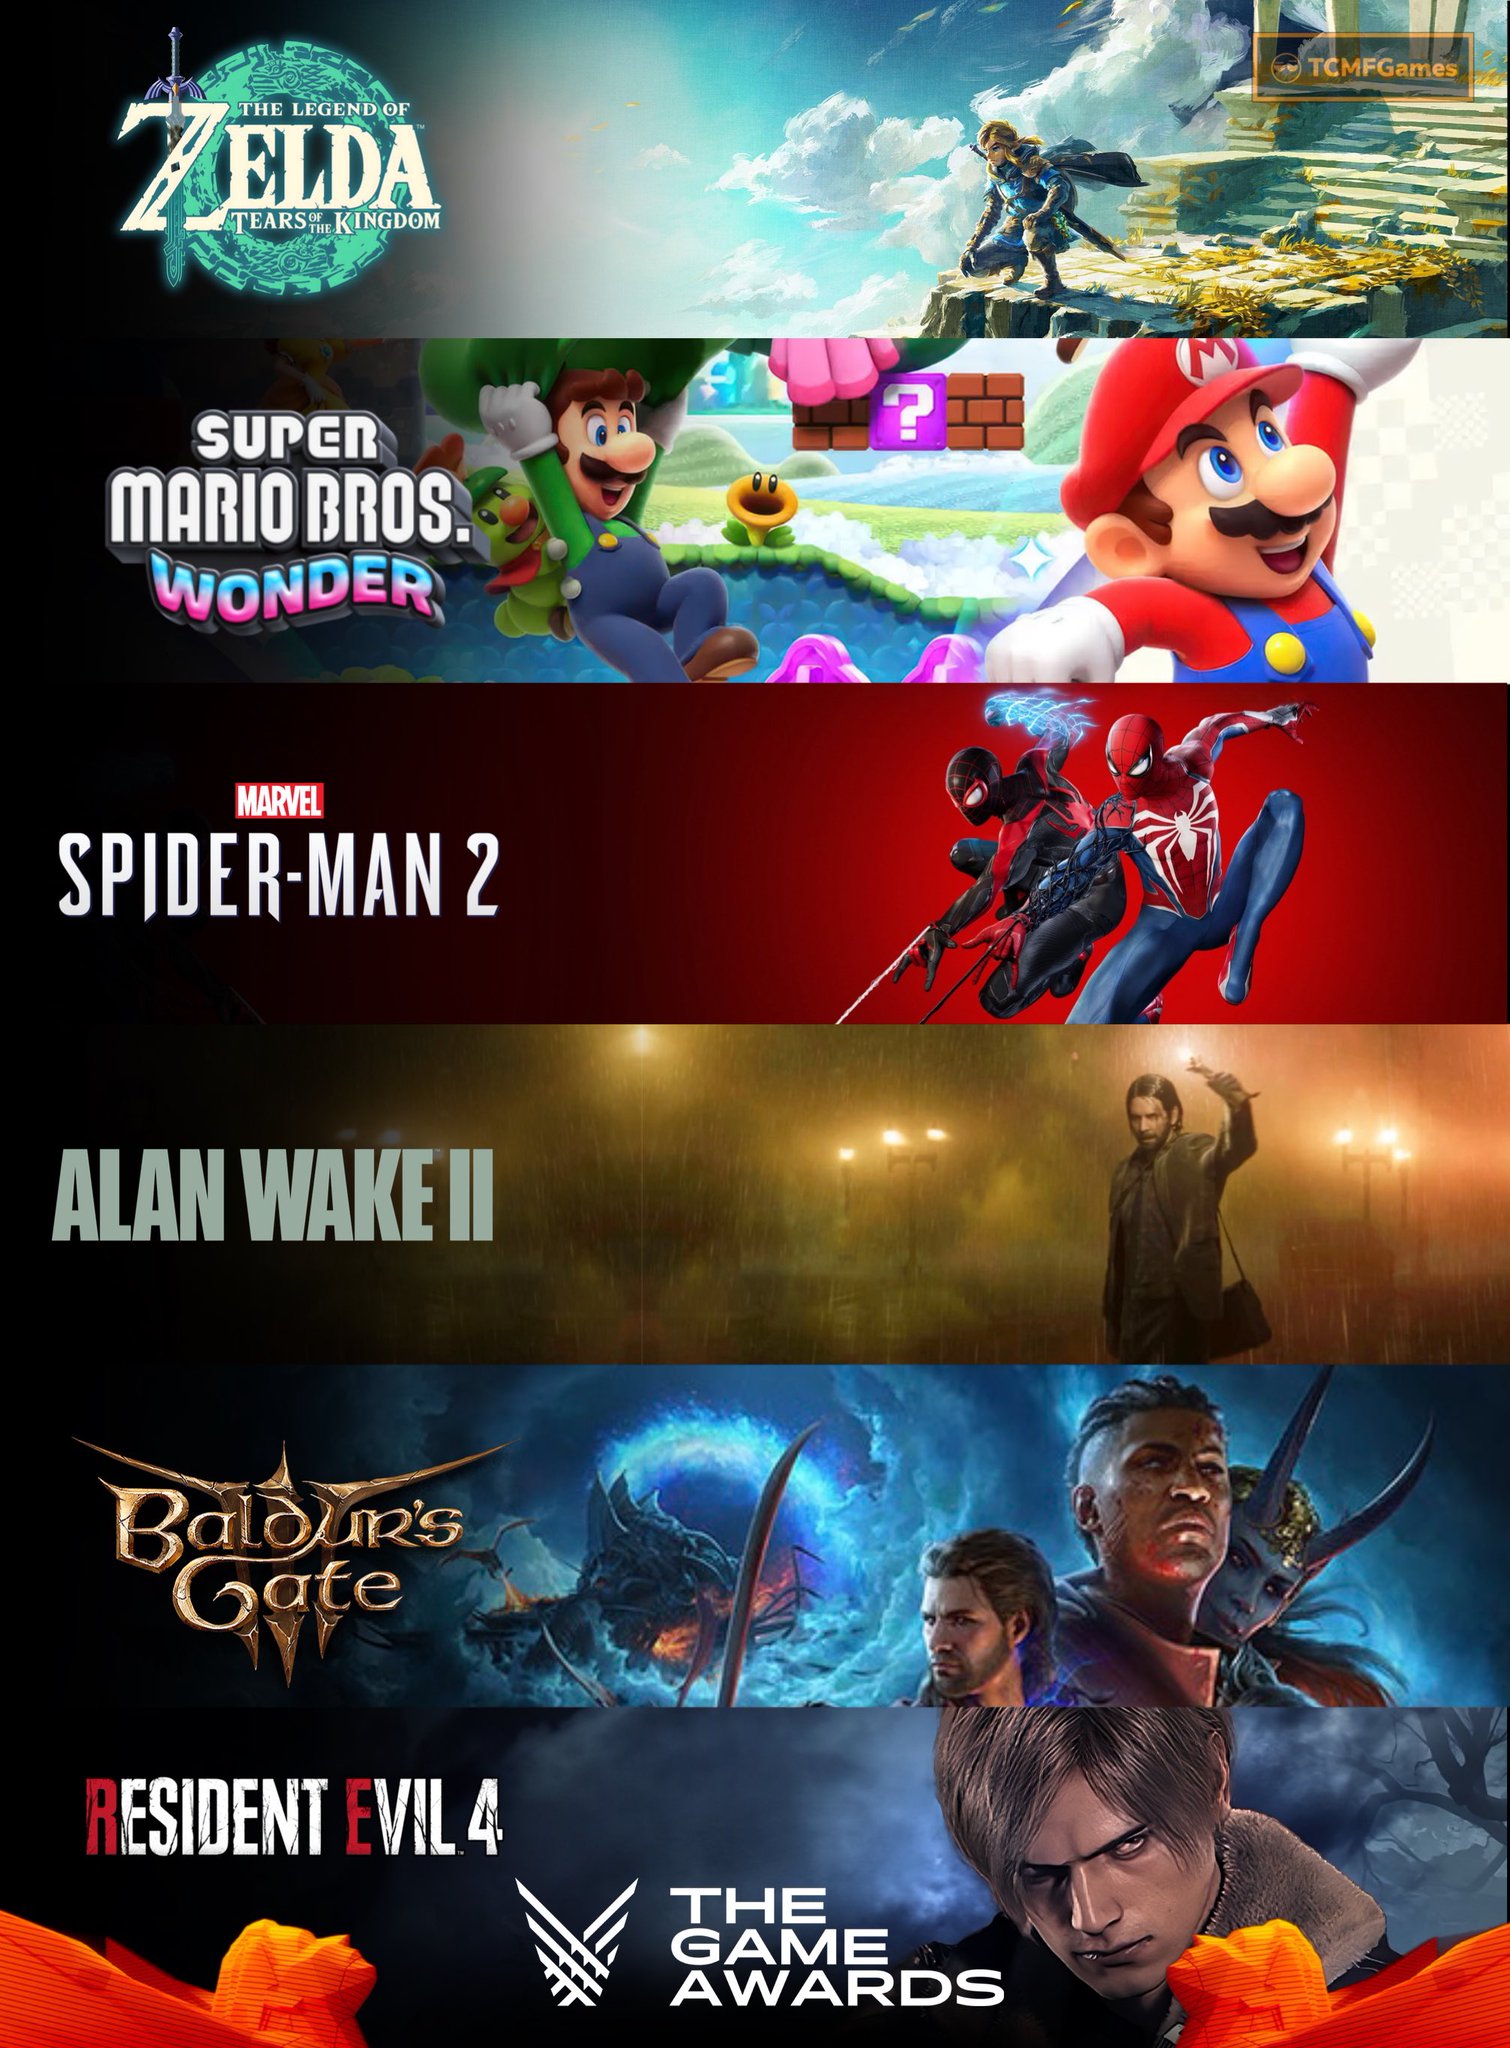 The Game Awards  Game of the Year Nominees Alan Wake 2 Spider-Man 2  Resident Evil 4 Baldur's Gate 3 Super Mario Bros. Wonder The Legend of  Zelda: Tears of the Kingdom : r/pcmasterrace